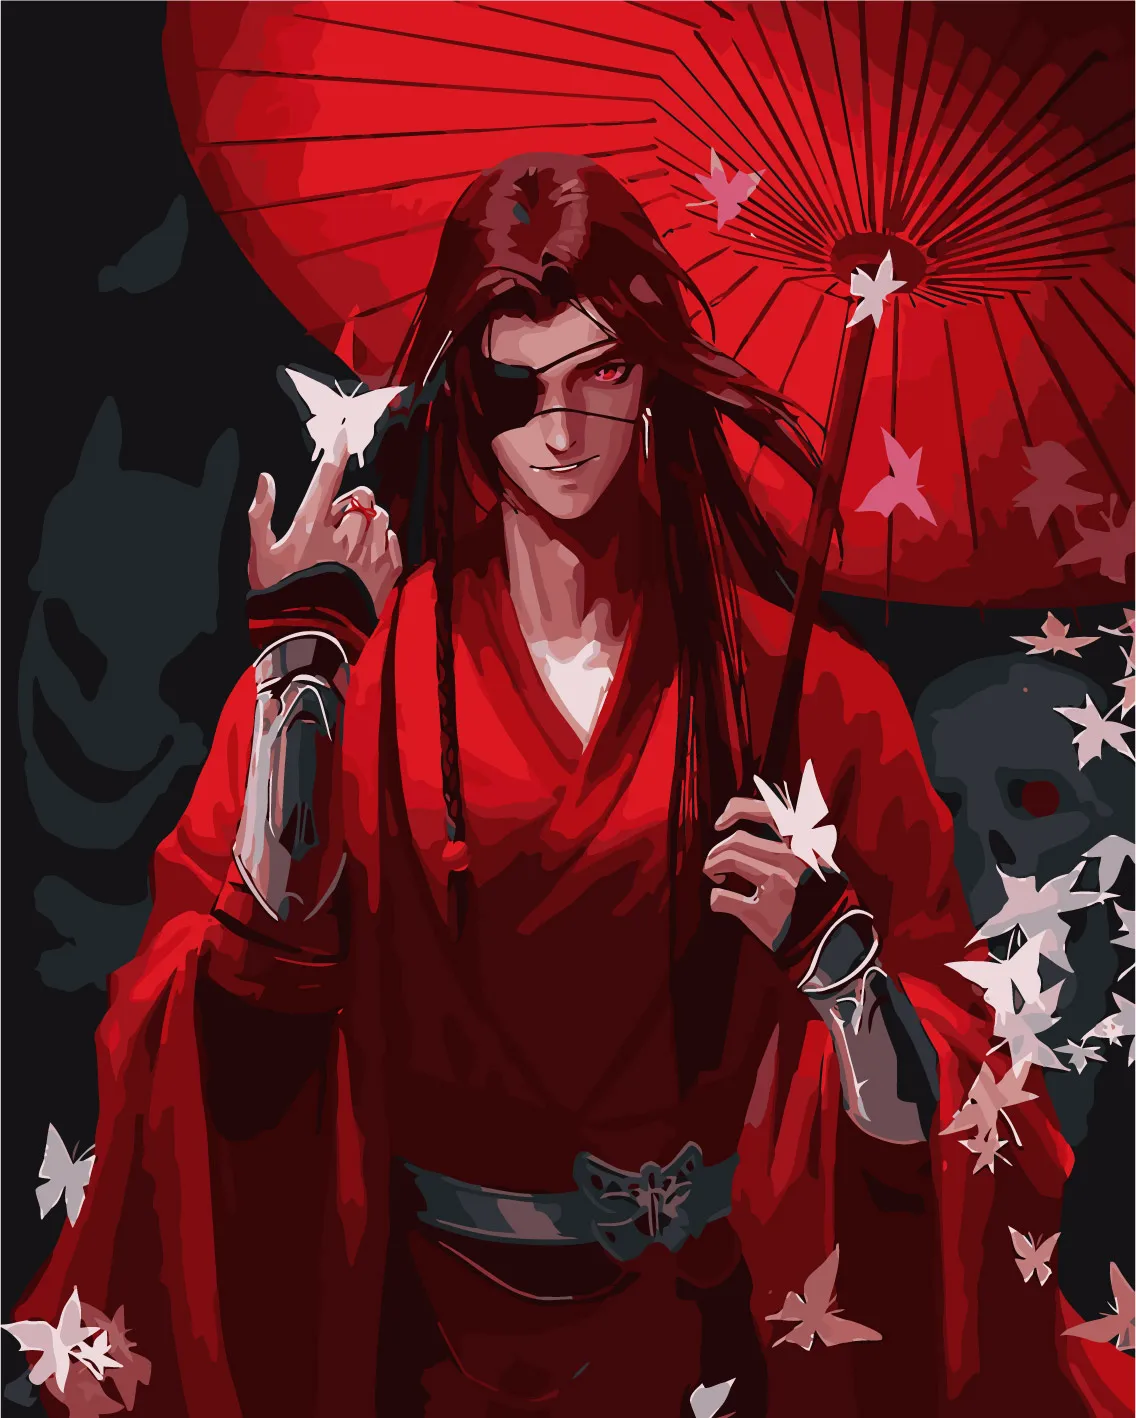  China Anime Poster Full Time Magister Quan Zhi Fa Shi  Characters Collection Xianxia World P3 Canvas Poster Bedroom Decor Sports  Landscape Office Room Decor Poster Gift 16x24inch(40x60cm) : מוצרים למשרד